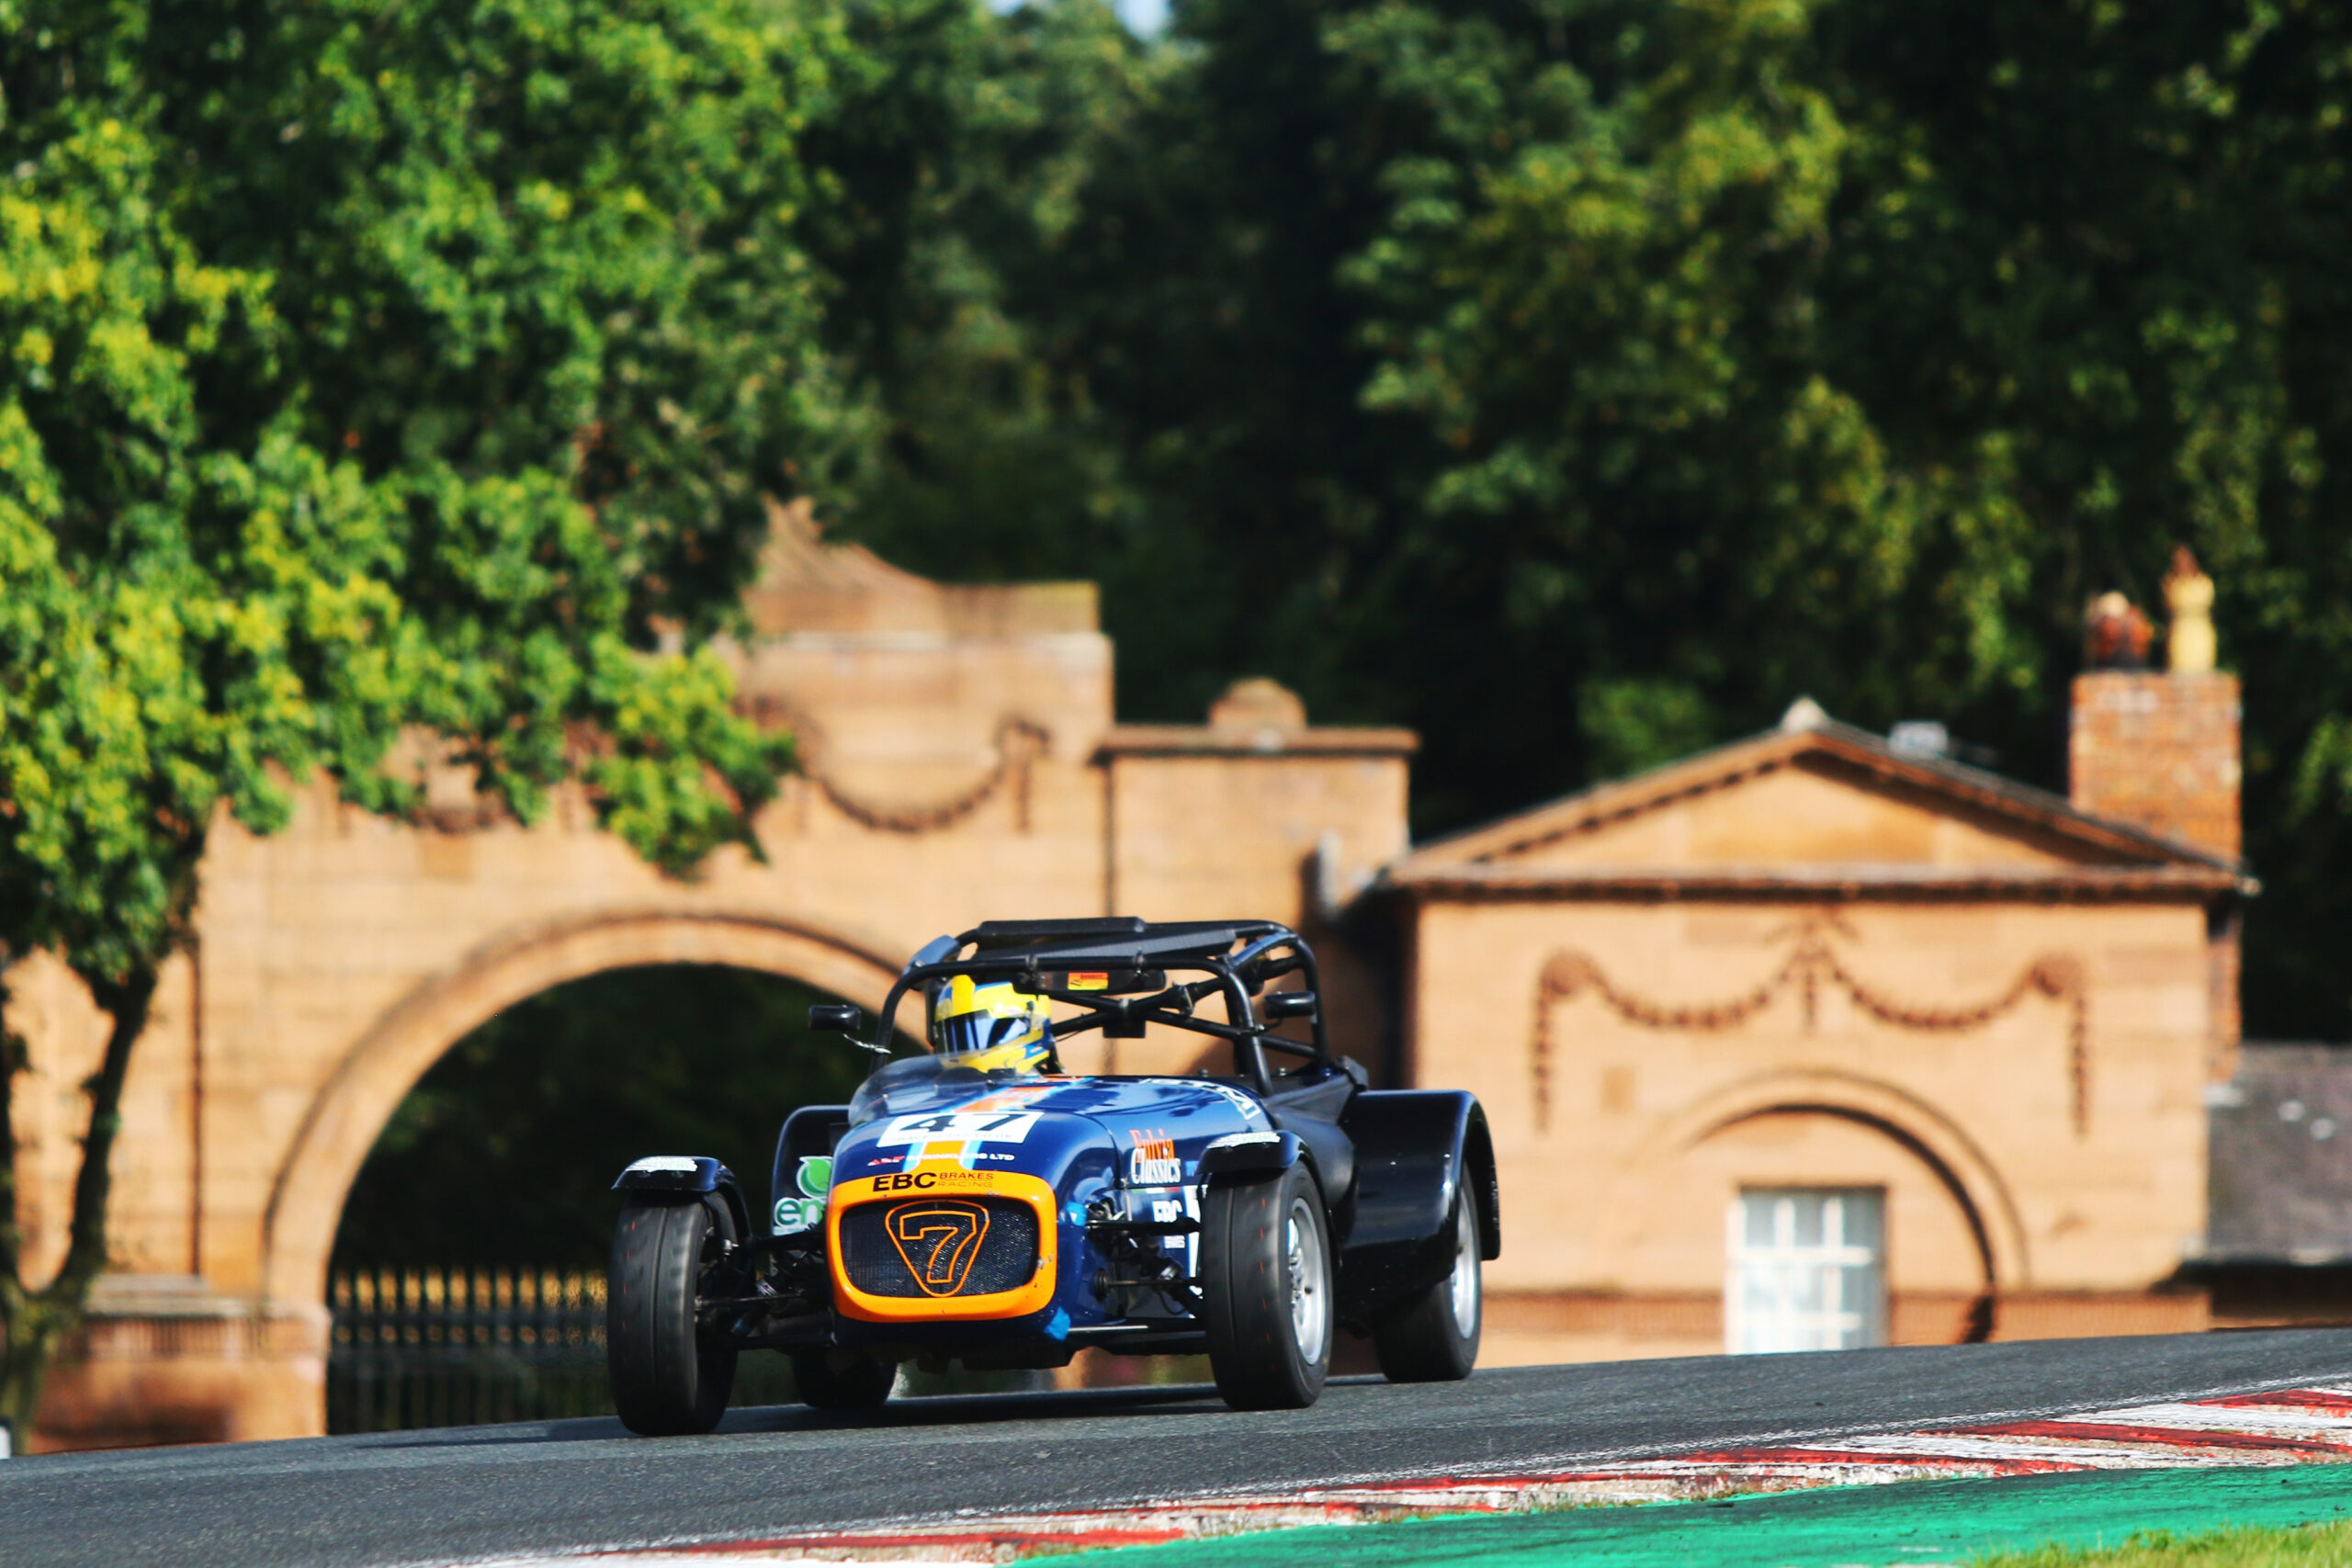 EBC-Equipped Caterham Driver Clinches Second Overall in Toyo Tires 7 Championship